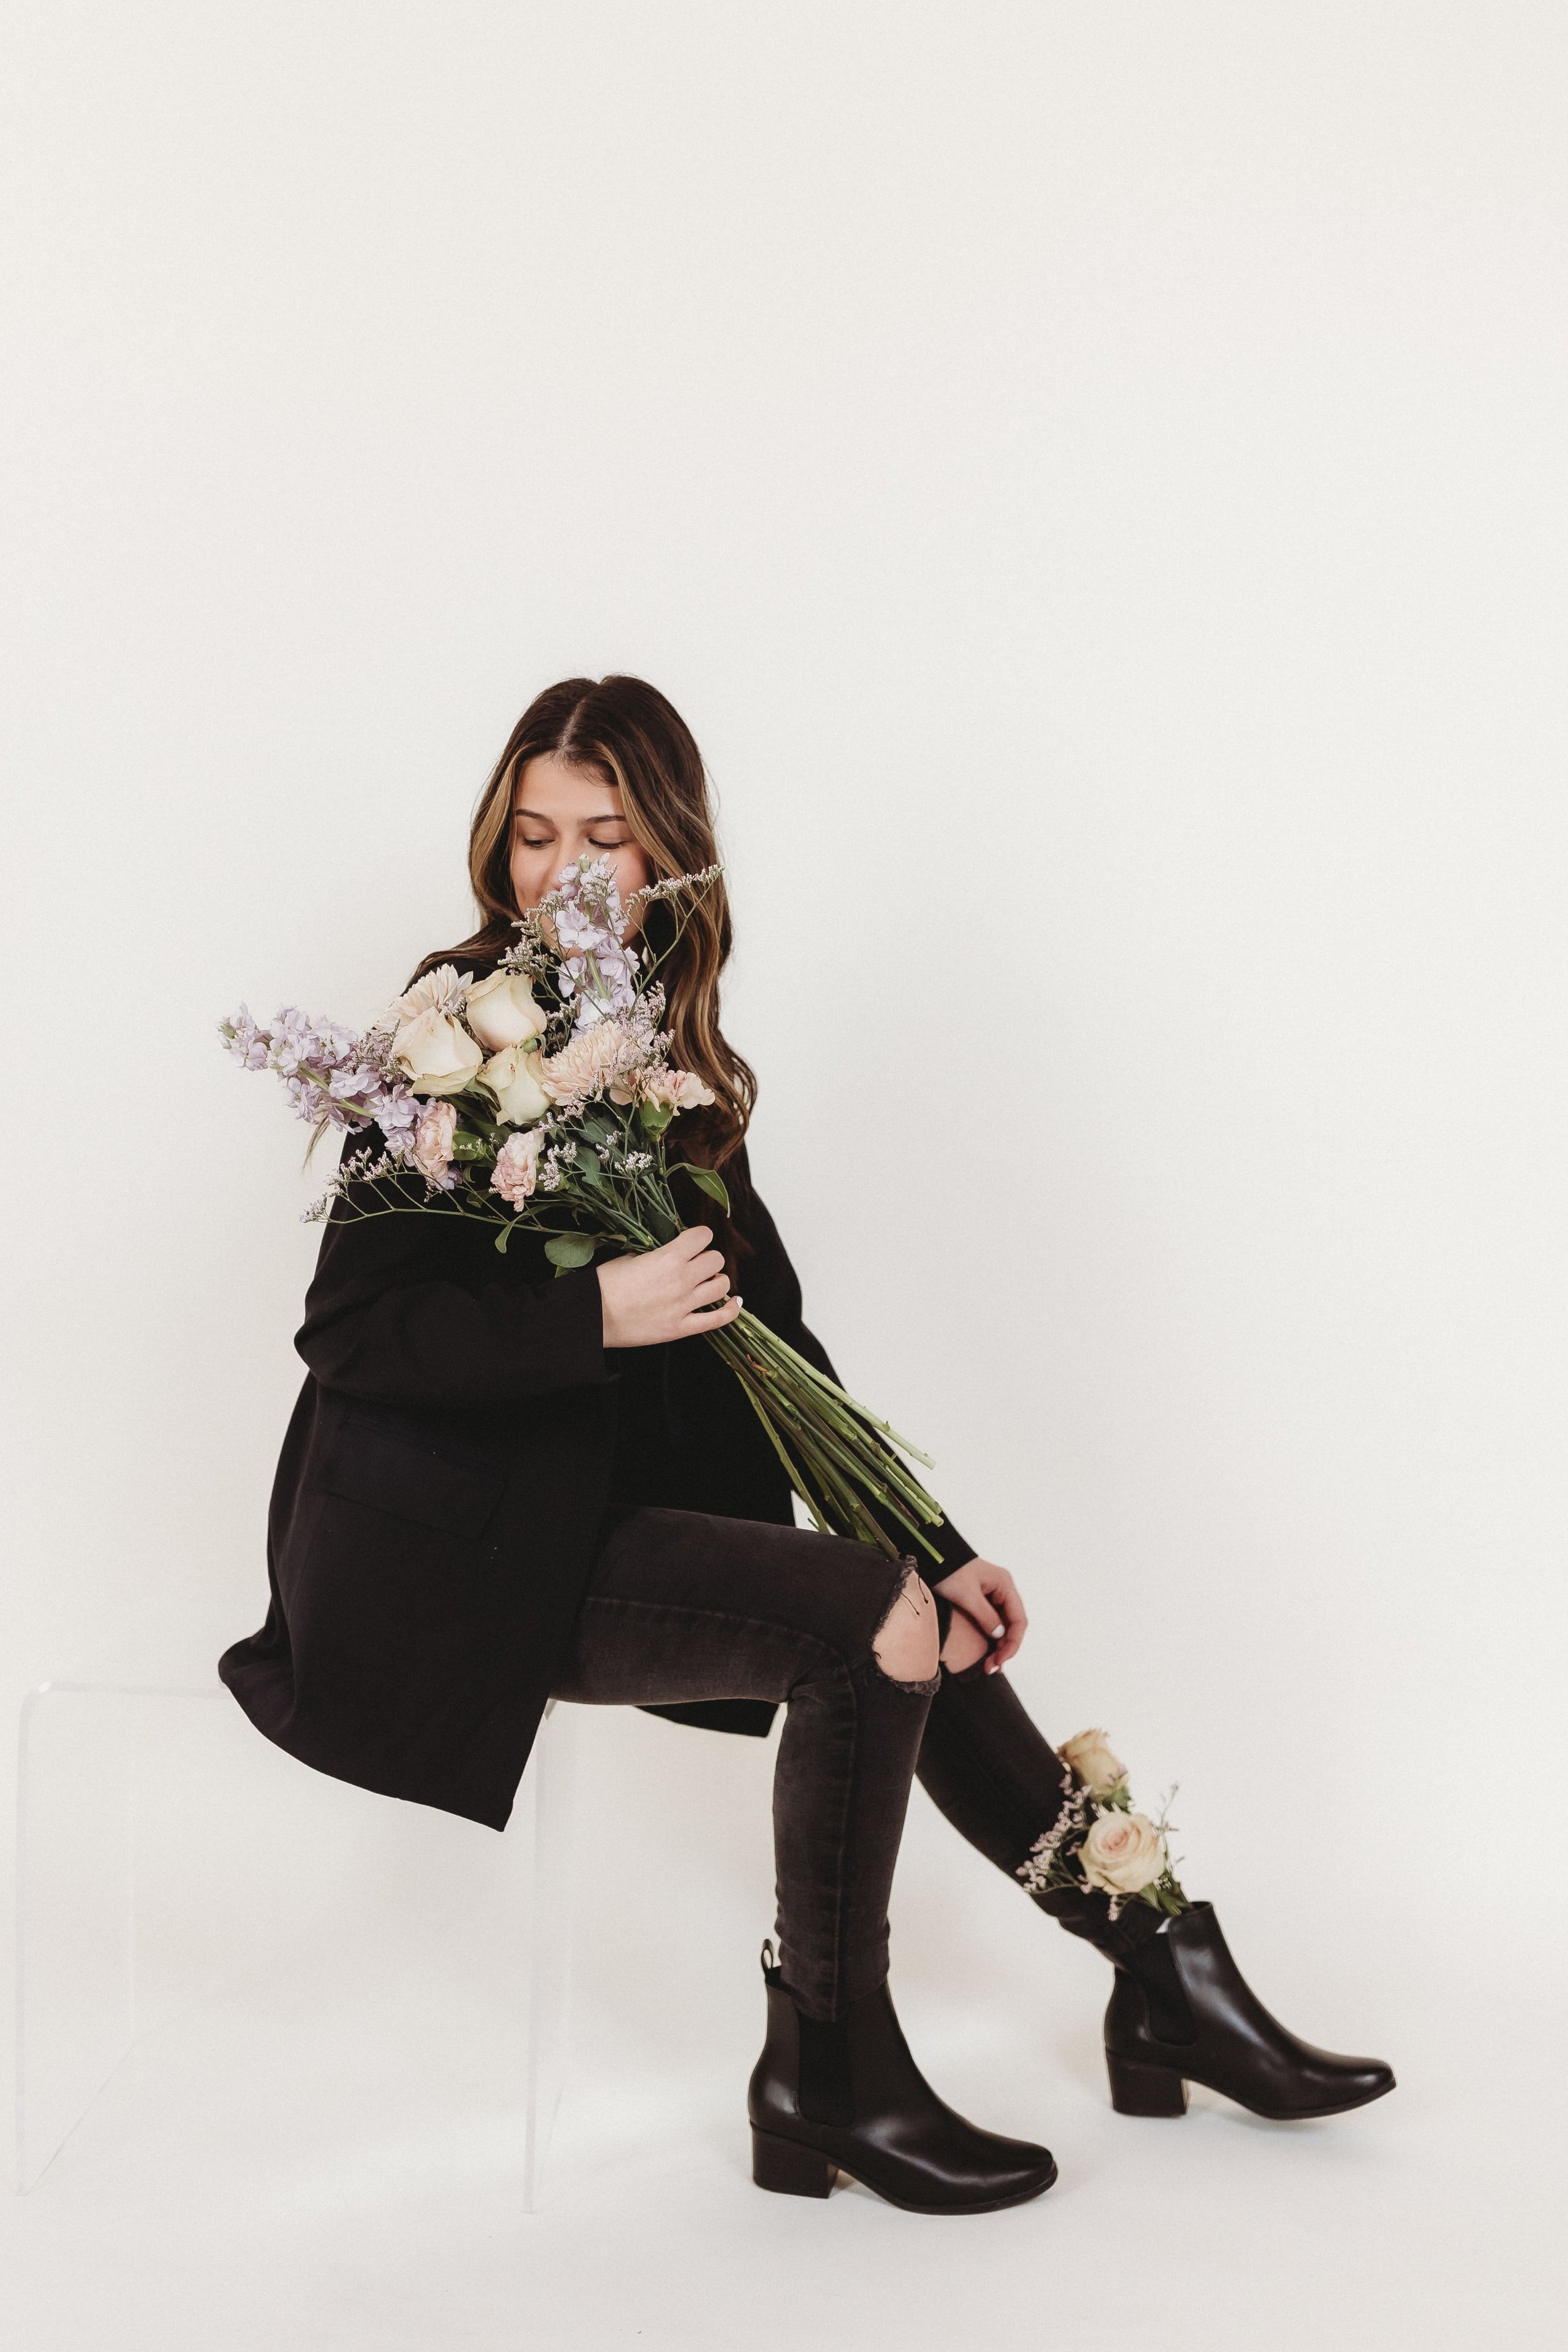  for floral business branding photography a woman sits and smells the flowers she holds 